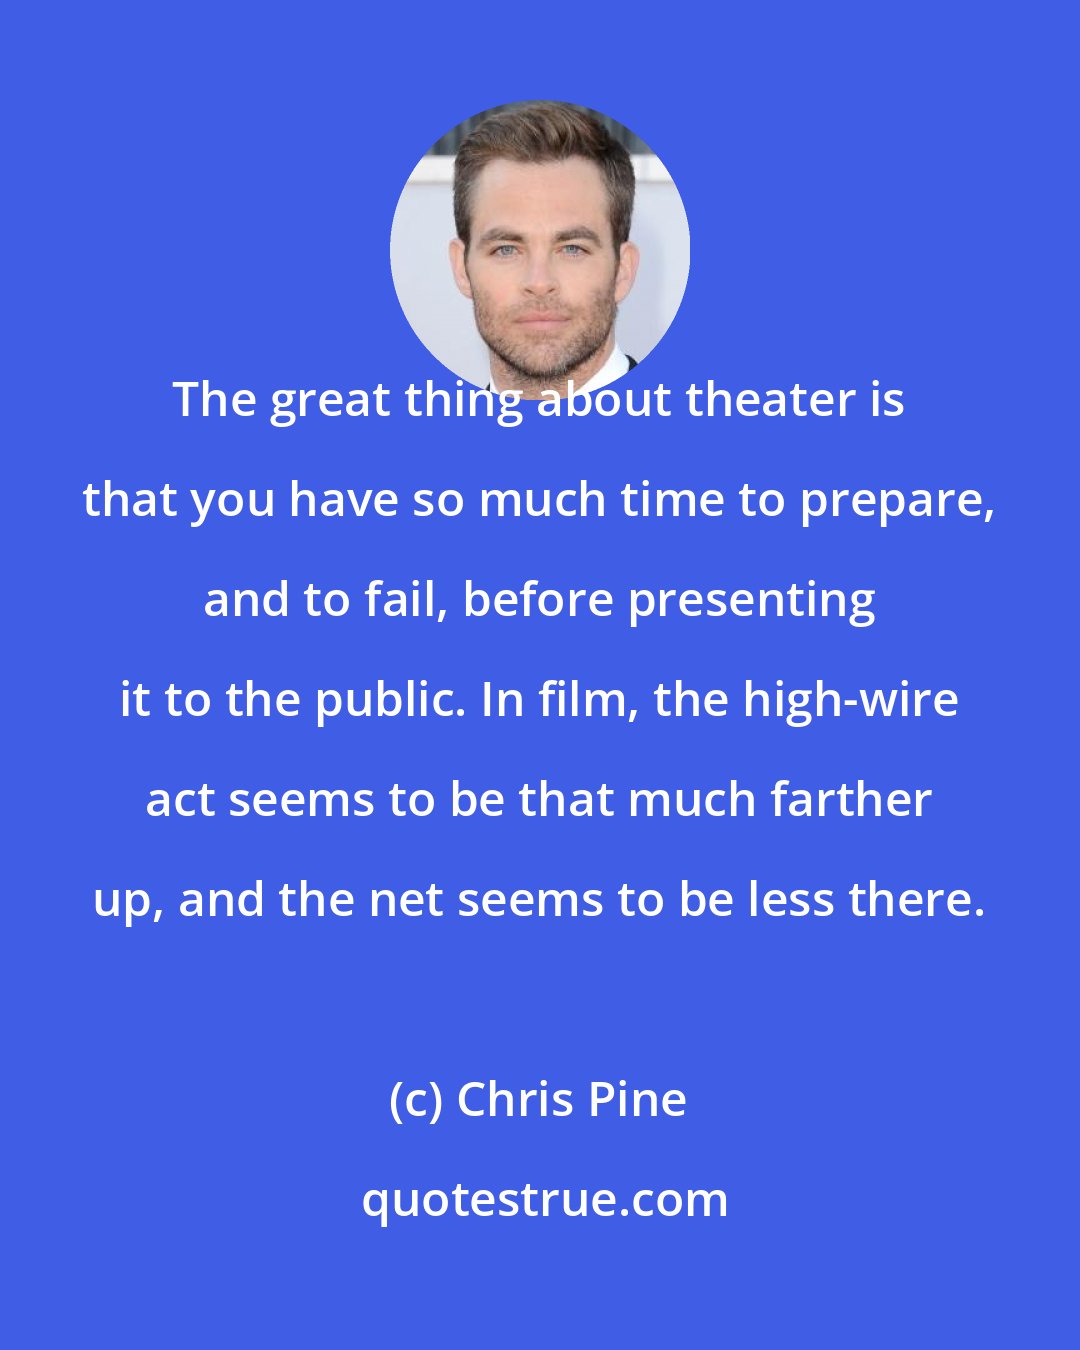 Chris Pine: The great thing about theater is that you have so much time to prepare, and to fail, before presenting it to the public. In film, the high-wire act seems to be that much farther up, and the net seems to be less there.